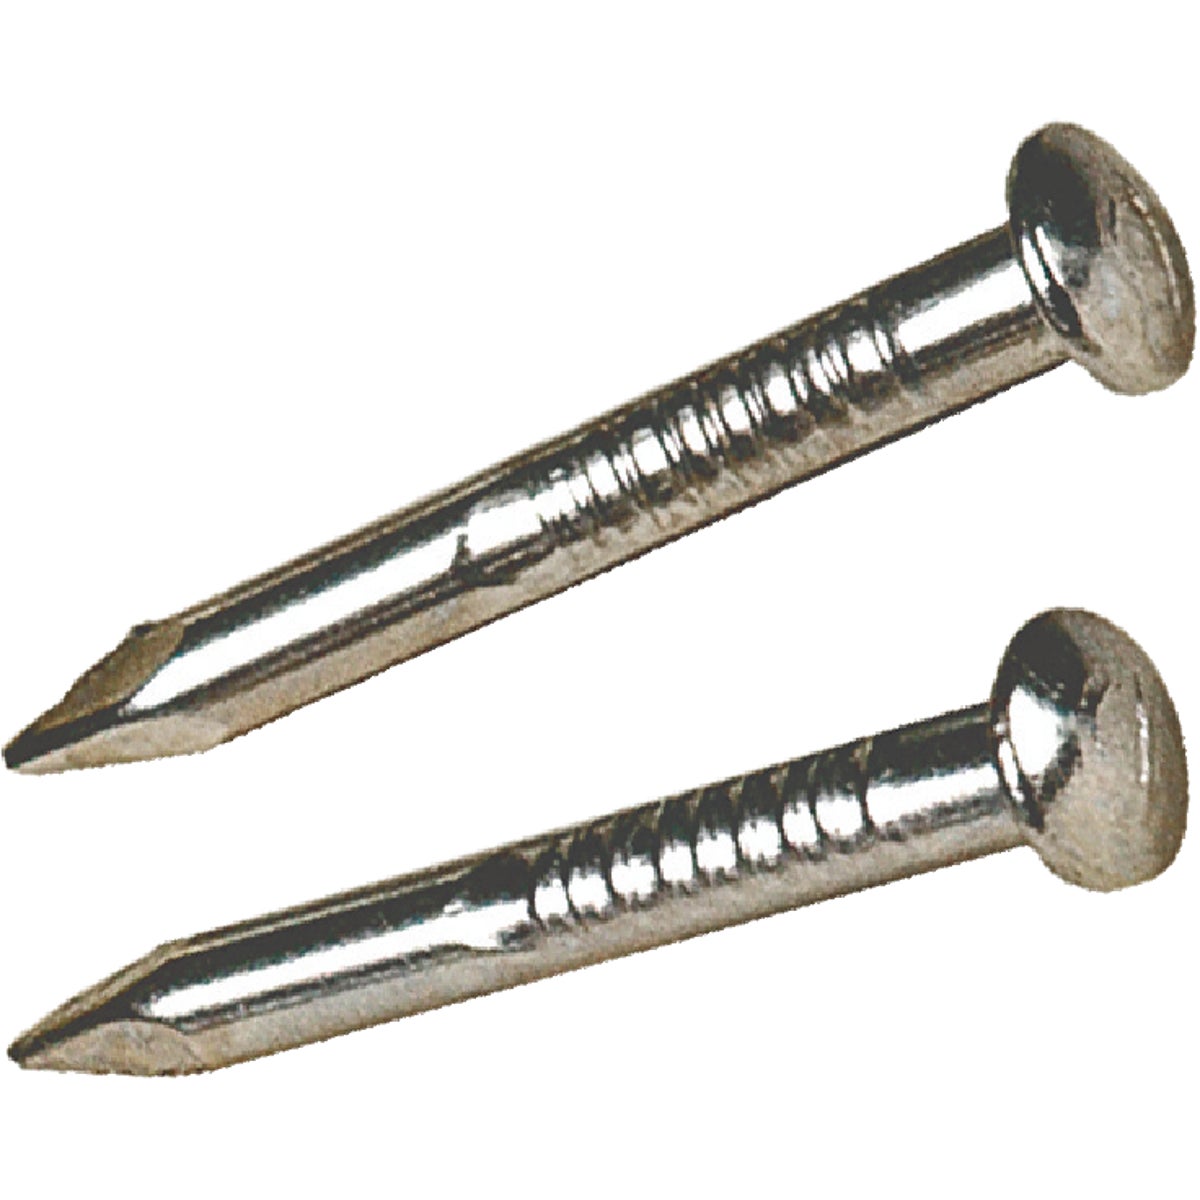 Item 729457, Nickel-Plated Shade Bracket Nails are ideal for projects where small nails 